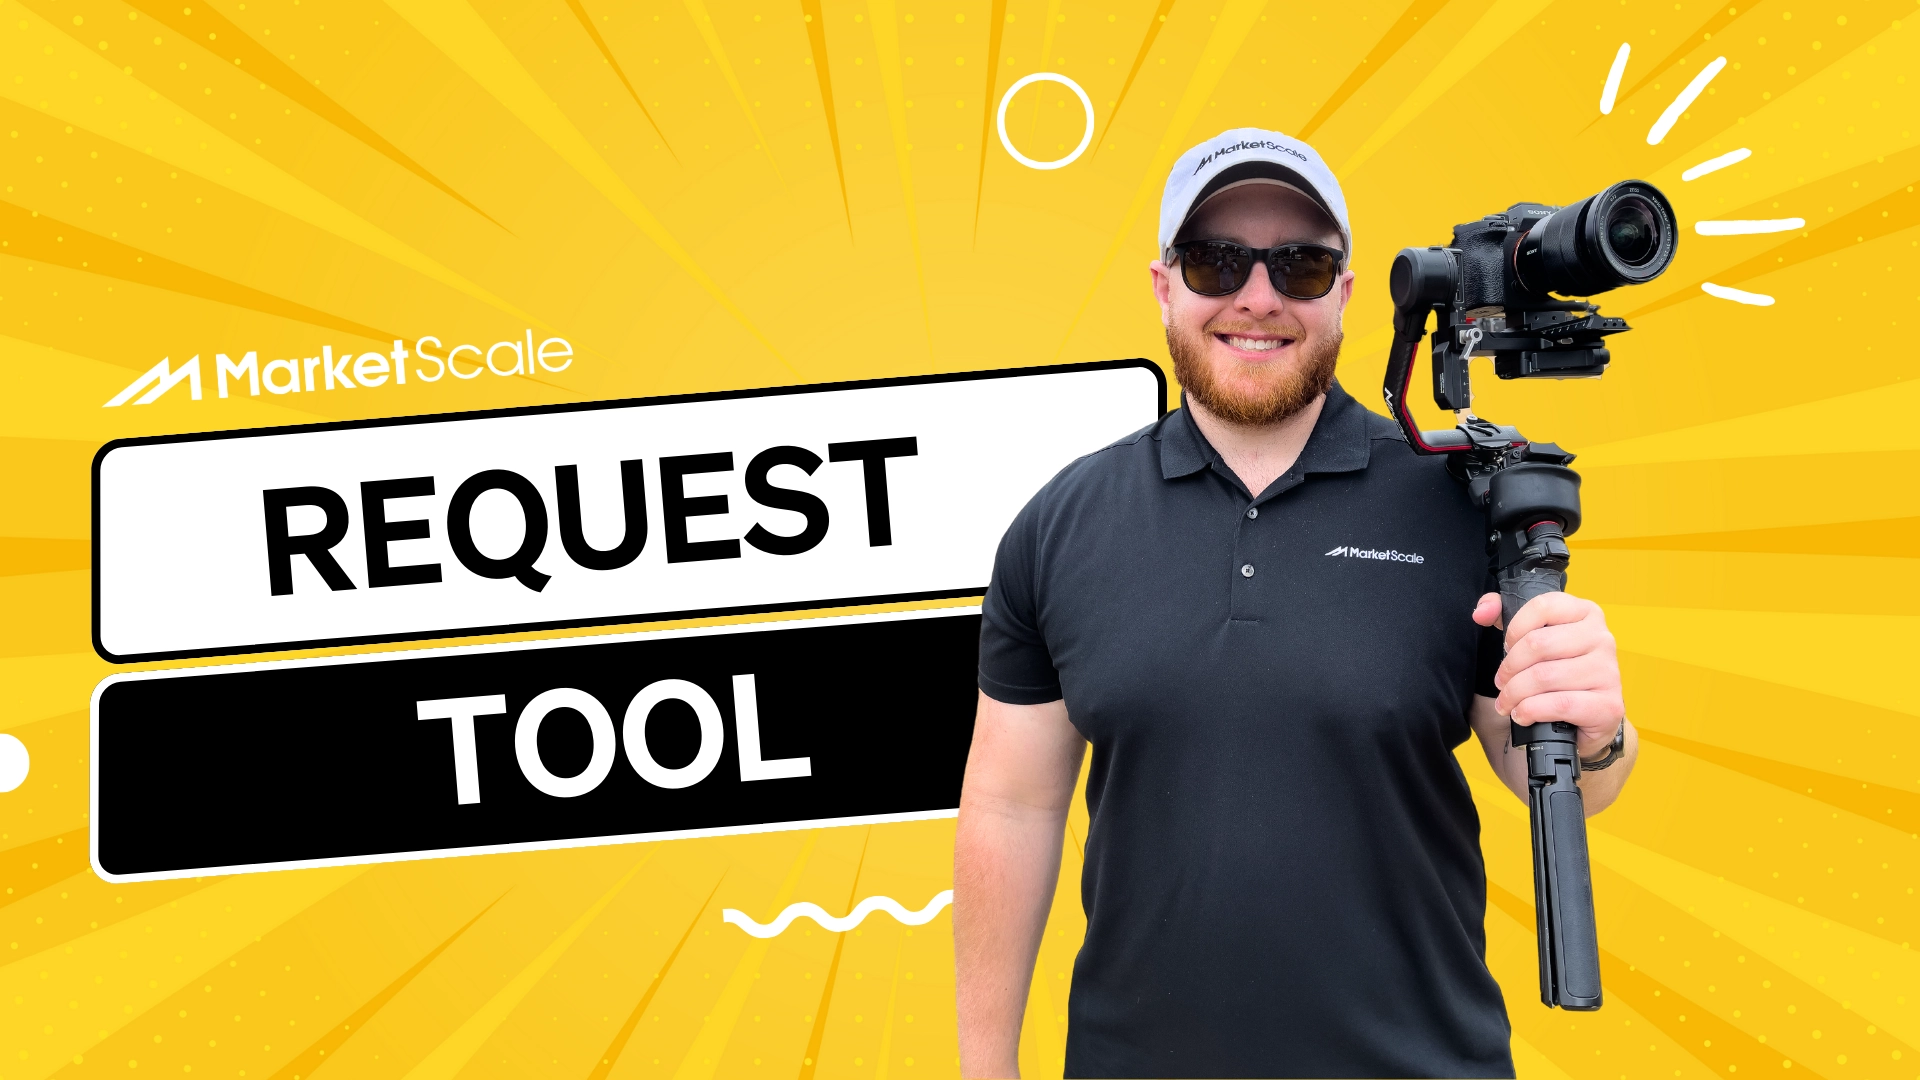 Streamline Content Capture with MarketScale’s Request Tool